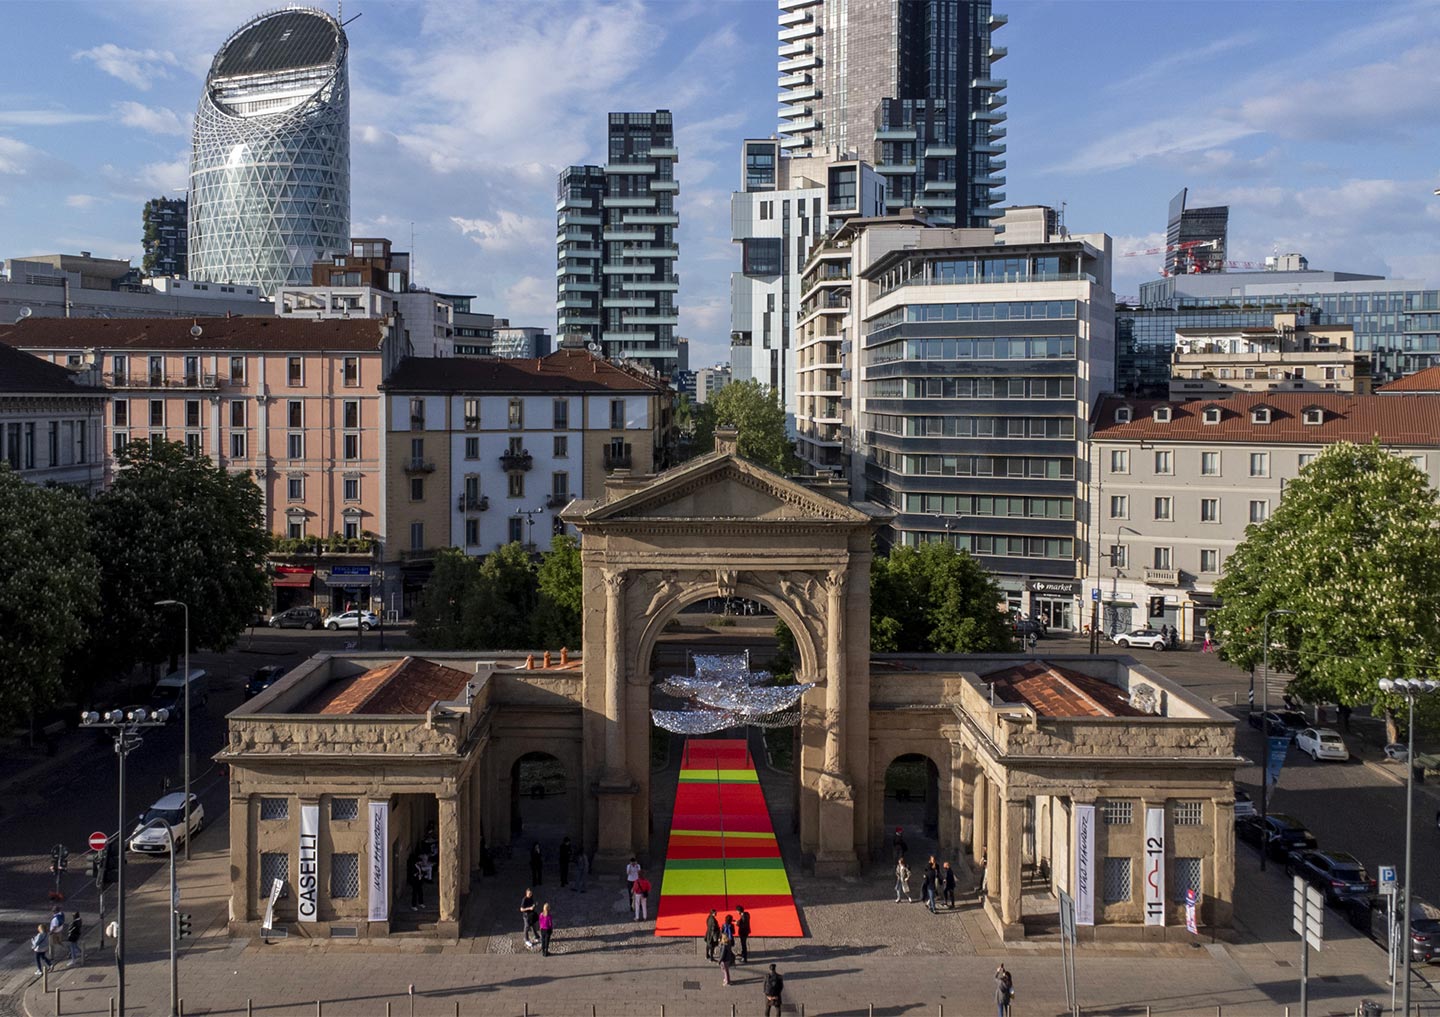 Ingo Maurer presented an open-air installation in Milan's Porta Nuova district to create reflection, dialogue and atmosphere from 18 to 23 April 2023